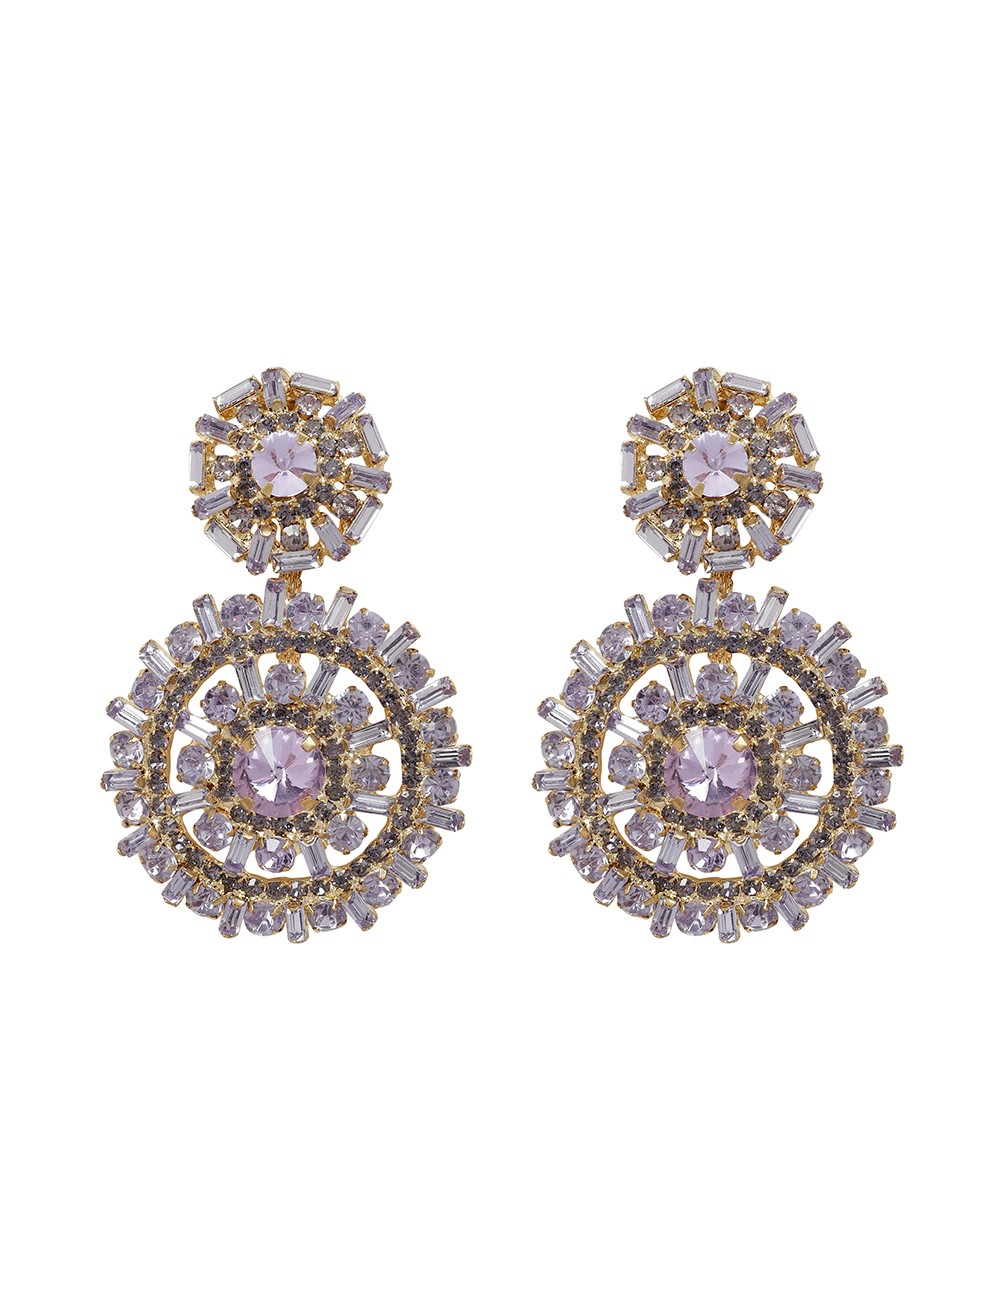 Gold Drop Earrings With Lilac Crystals